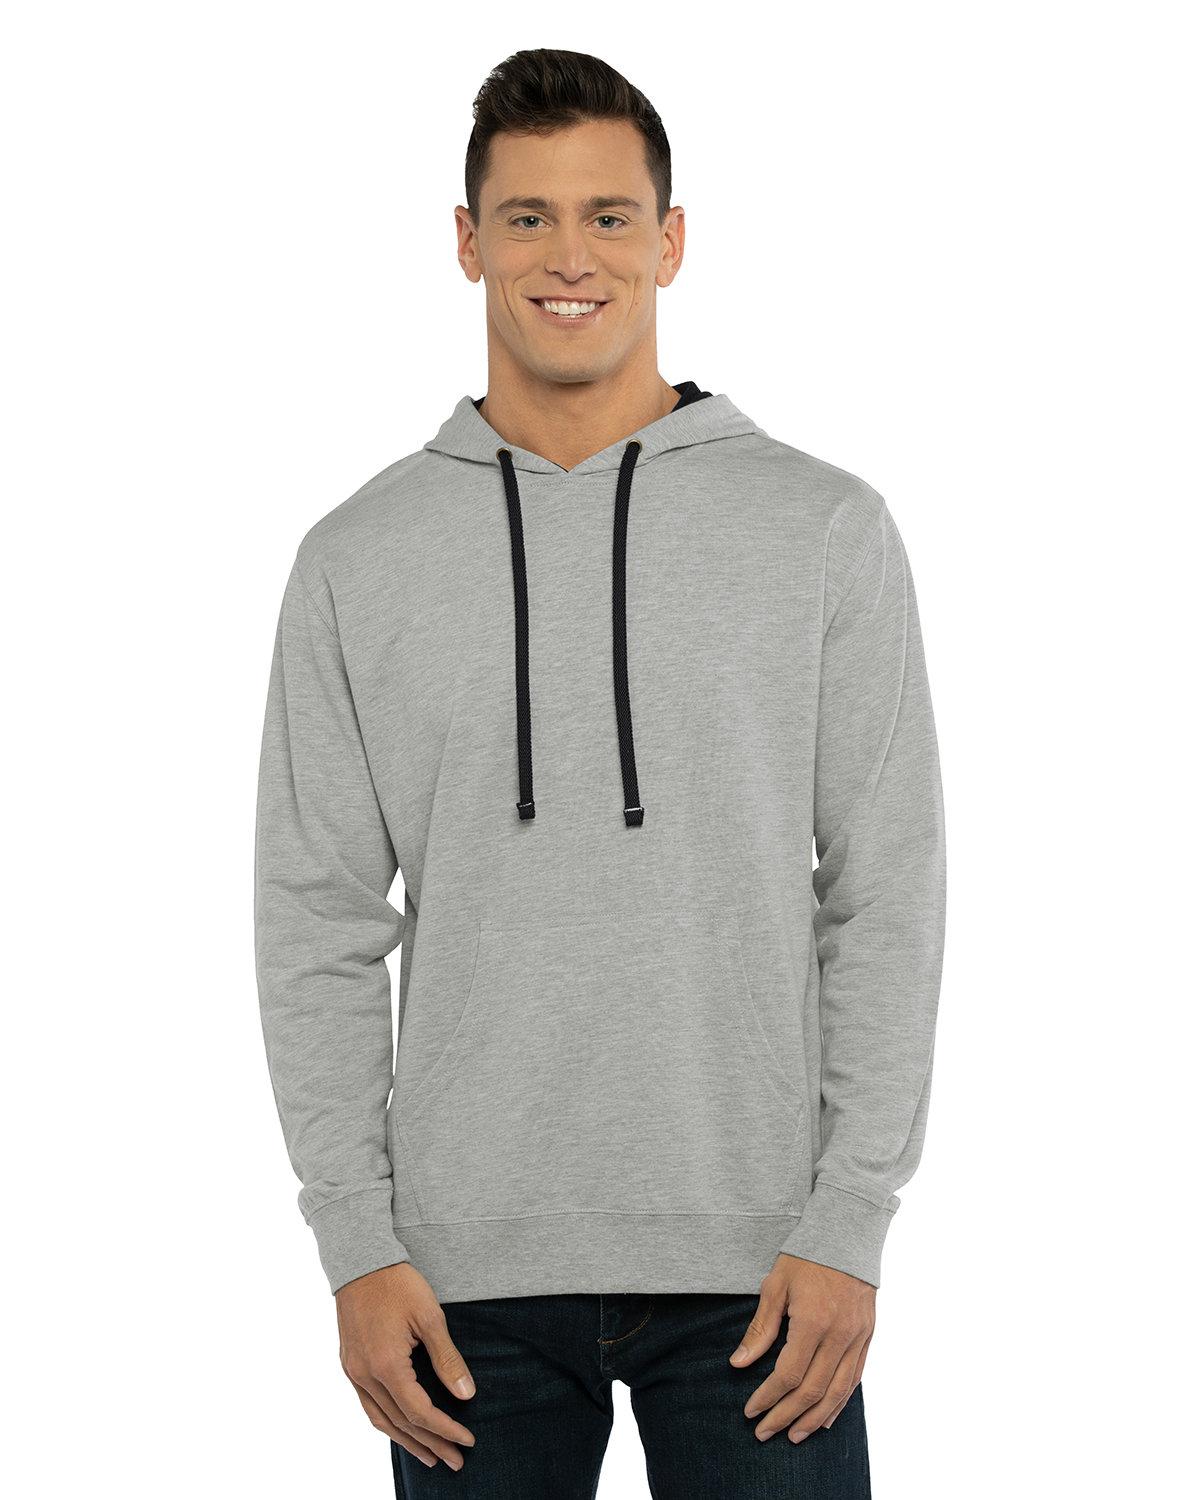 Next Level Apparel Unisex French Terry Pullover Hoodie HTHR GREY/ BLACK 